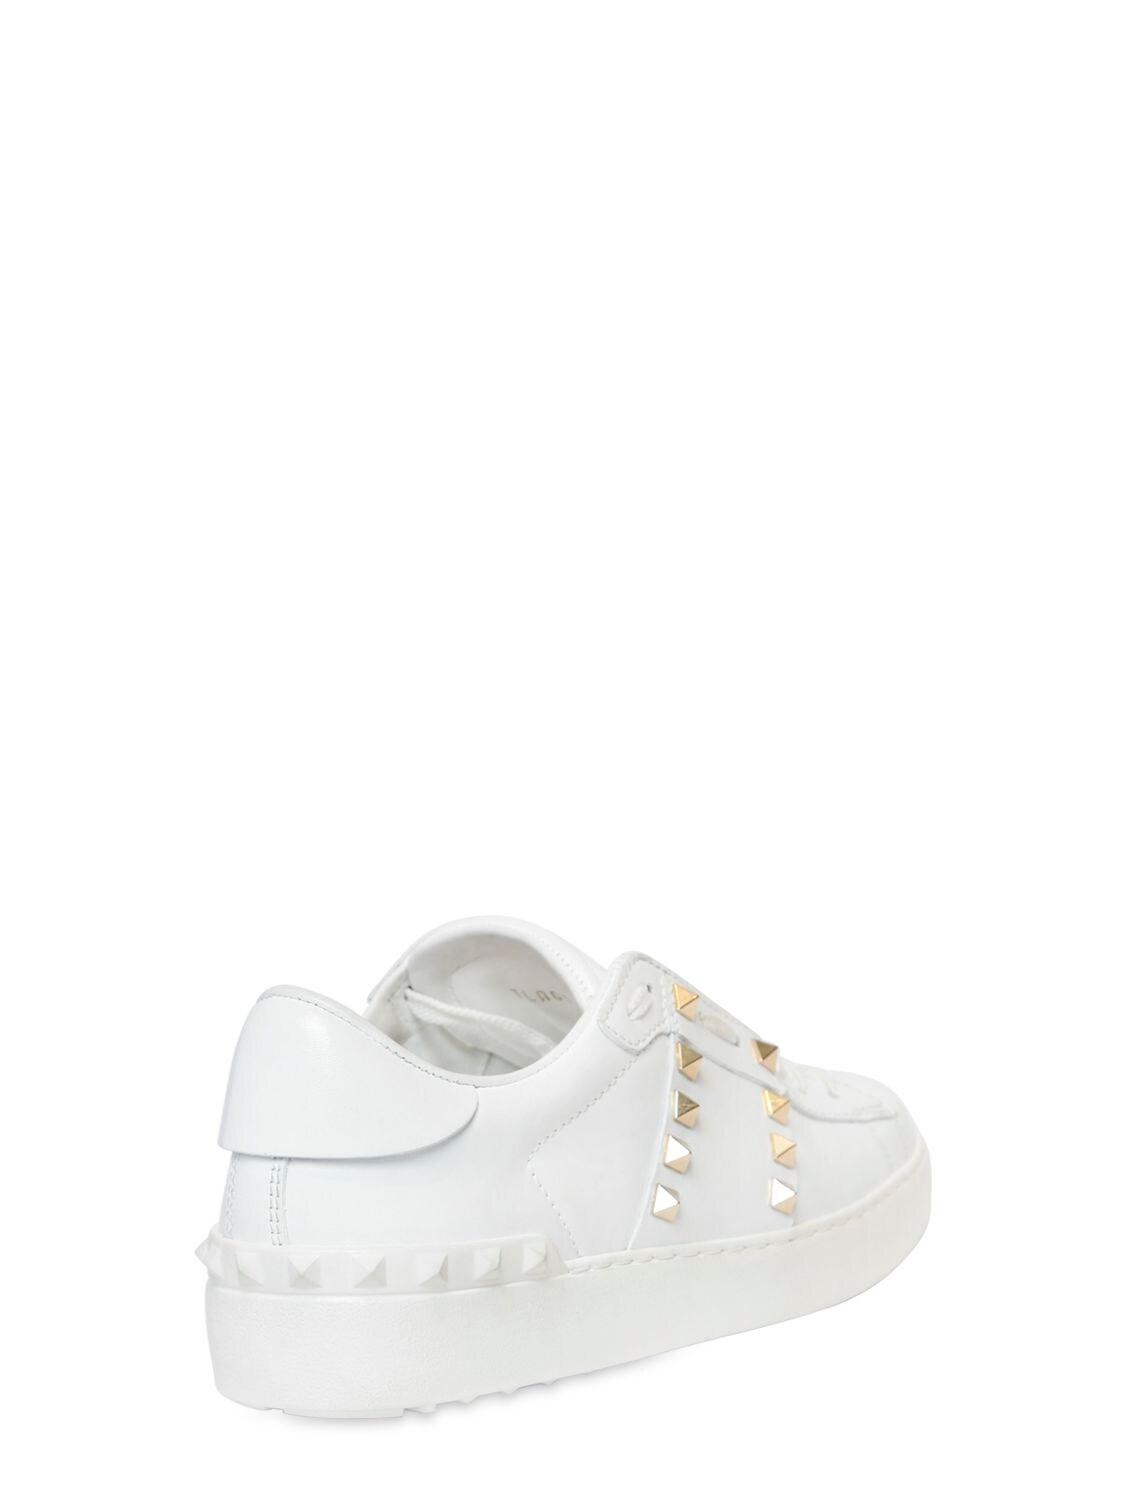 Valentino 20mm Rockstud Untitled Leather Sneakers in White - Lyst